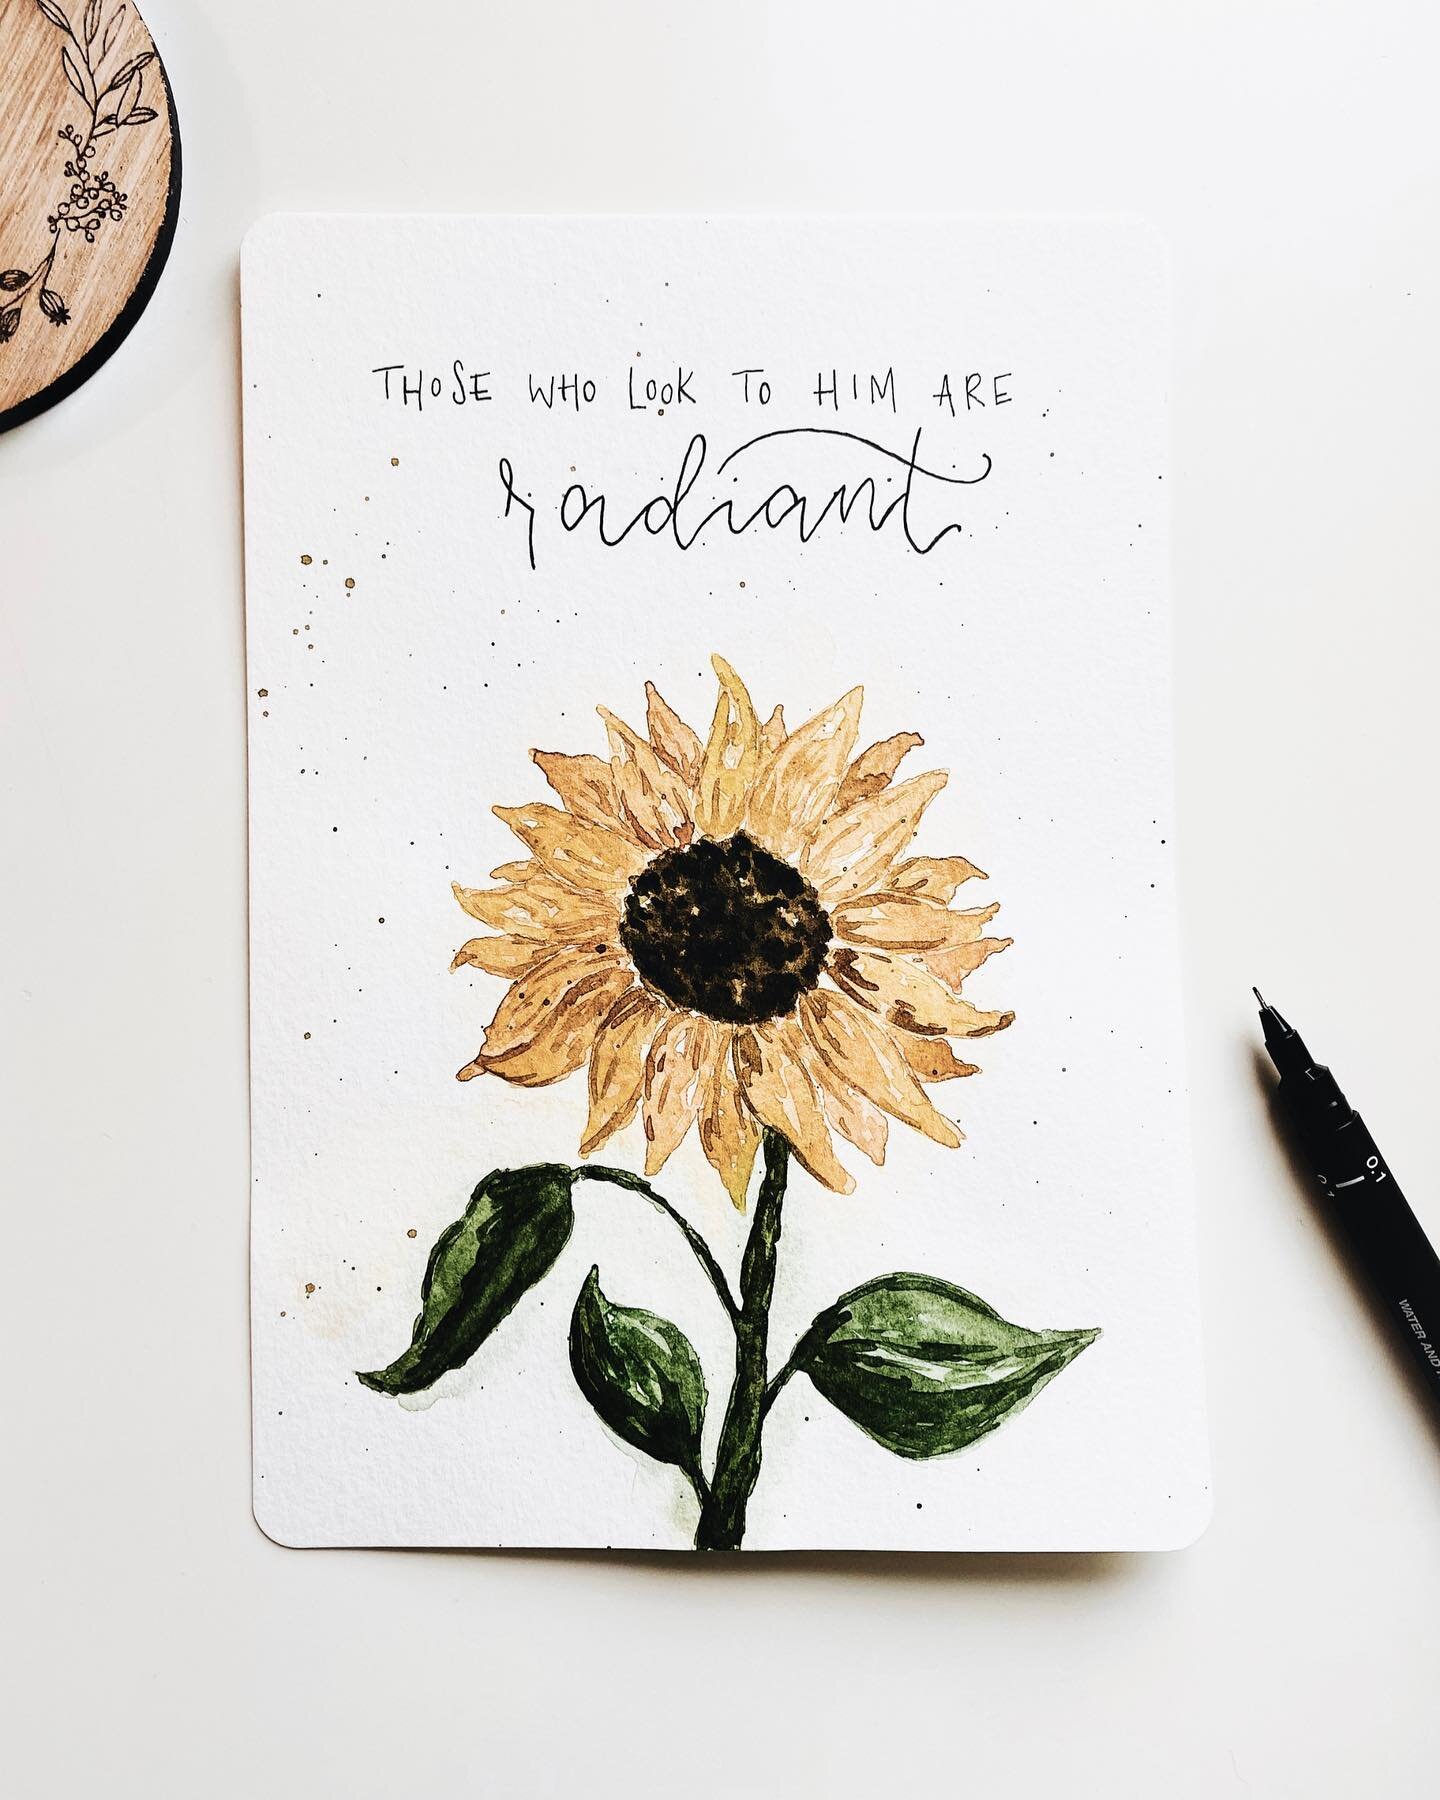 Turn your eyes upon Jesus 🤍🕊🌻⁣
⁣
The Lord&rsquo;s often used sunflowers to remind me to turn and look to Him. ⁣
Did you know that sunflowers continually turn and follow the sun through the day? This is because they know that the sun is their sourc